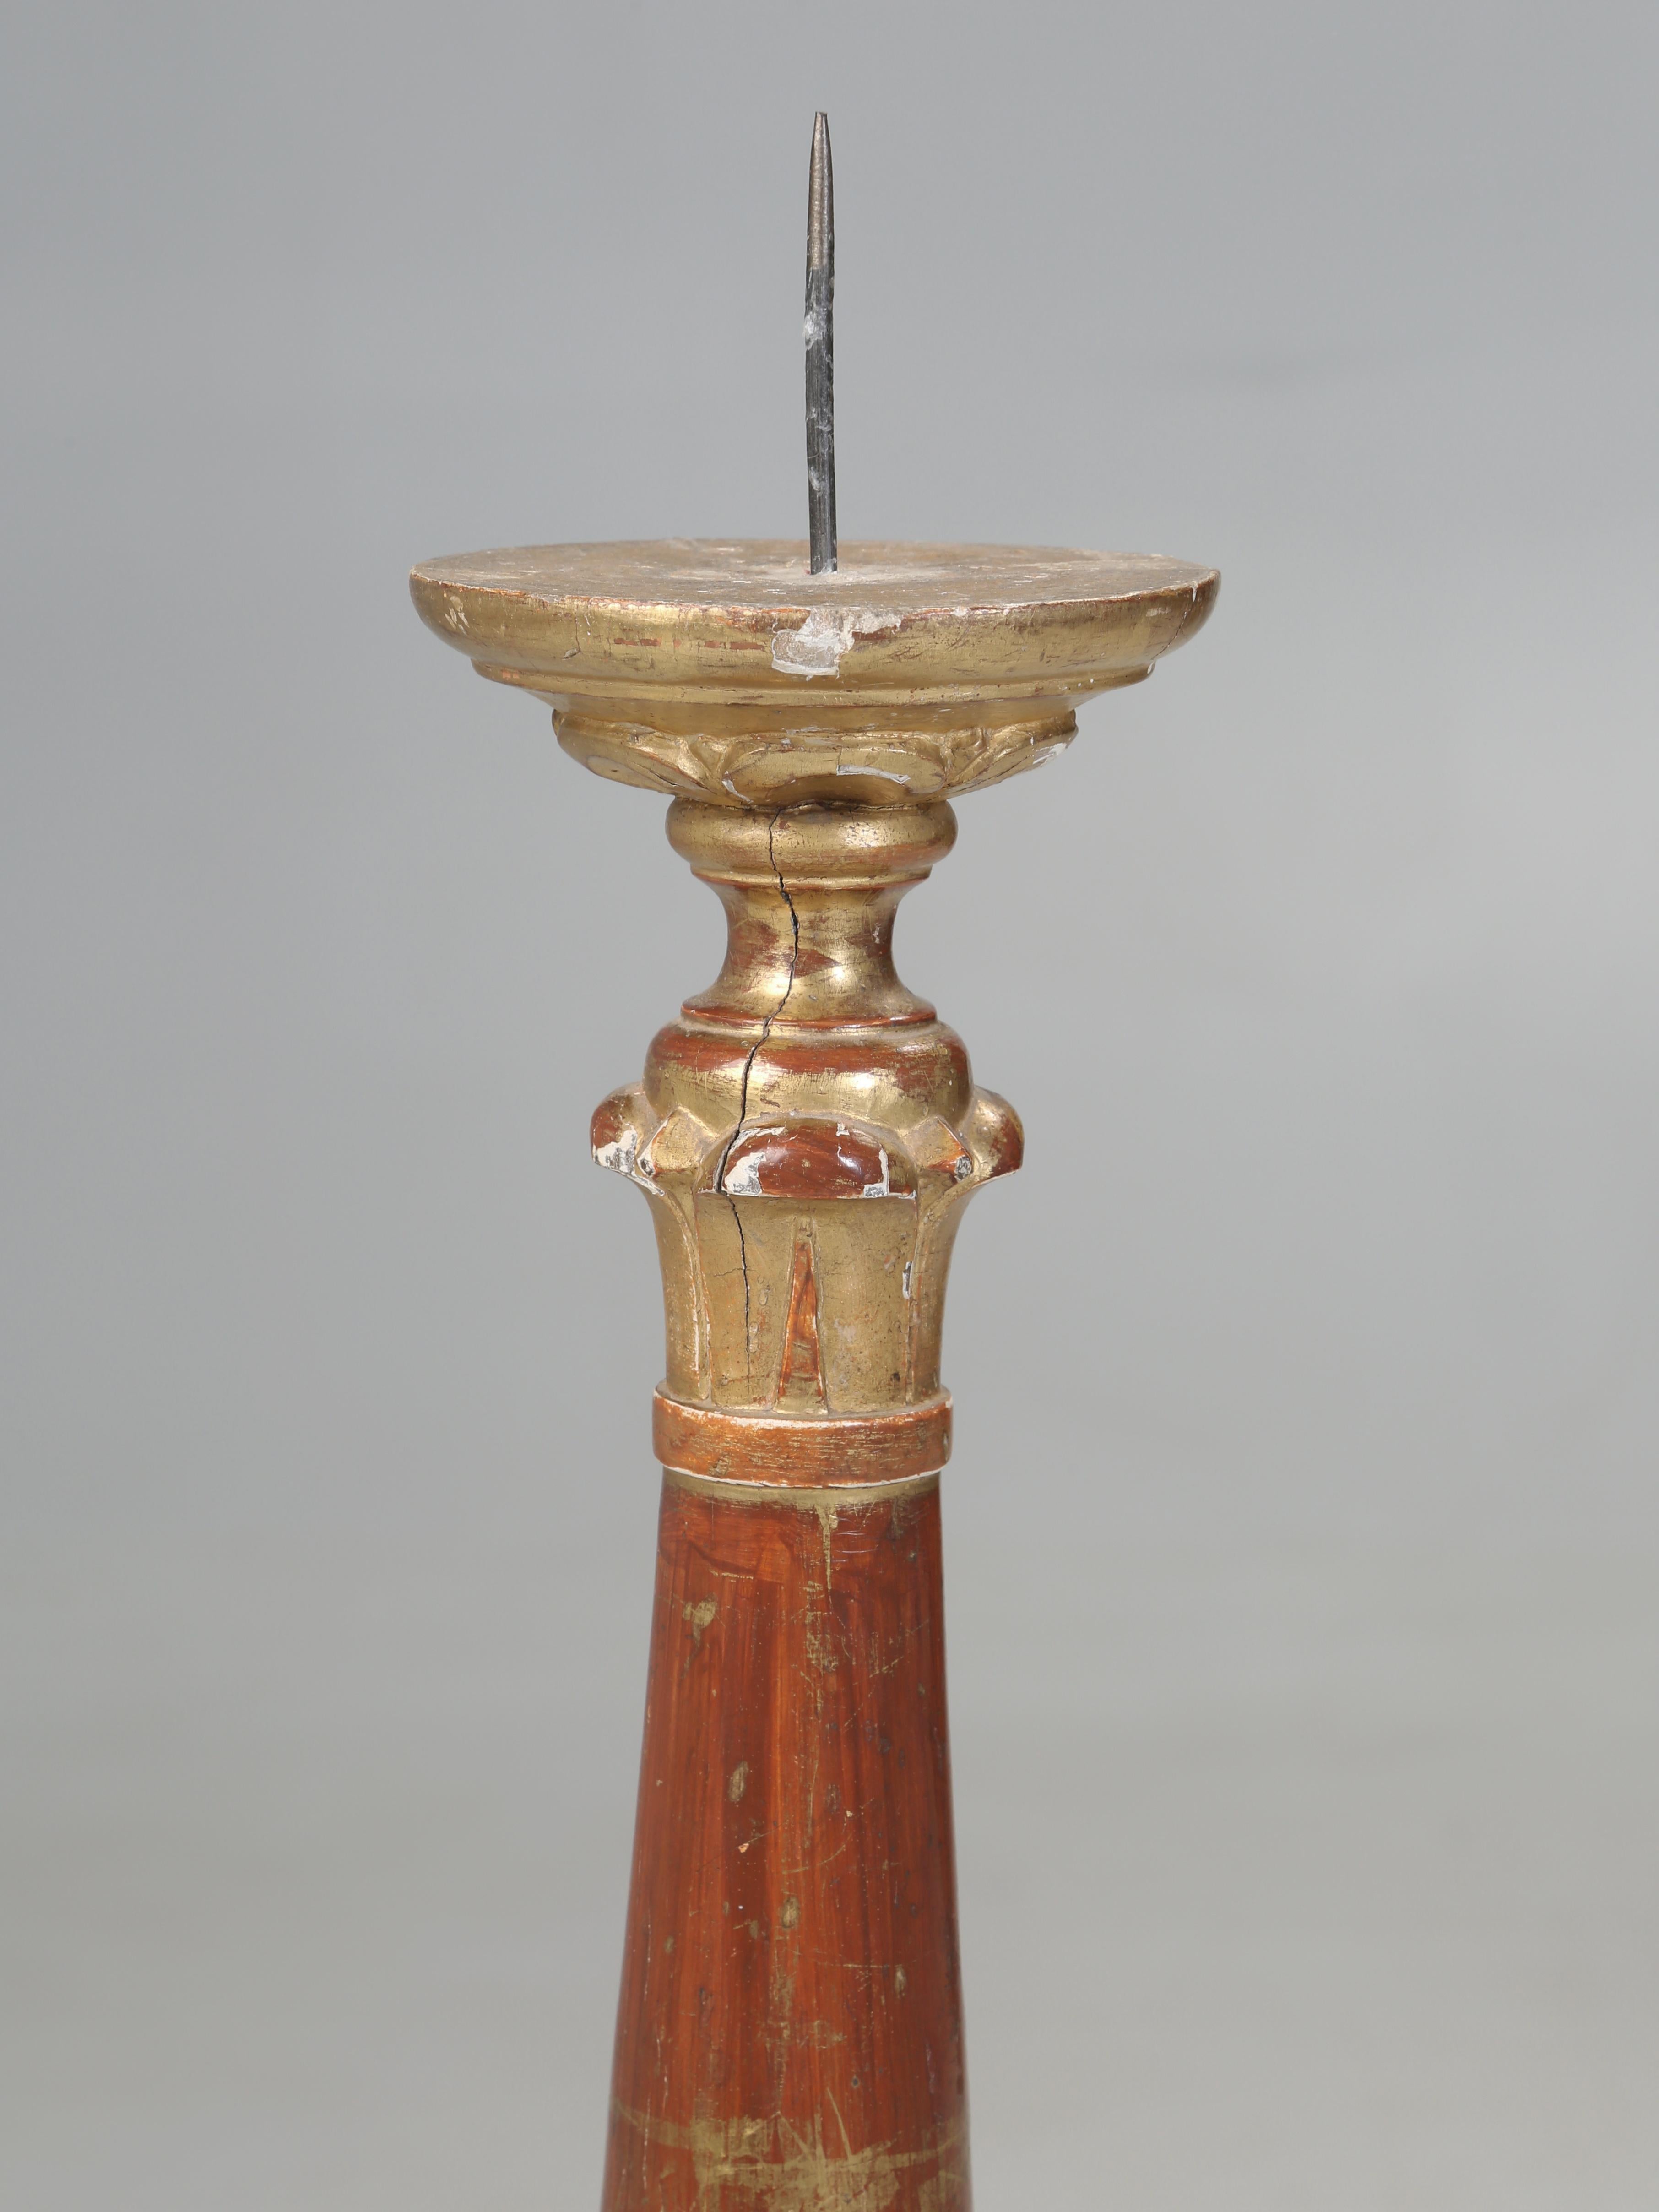 Renaissance Italian Gilded Altar Candlestick Completely Original and Unrestored c1780-1820 For Sale